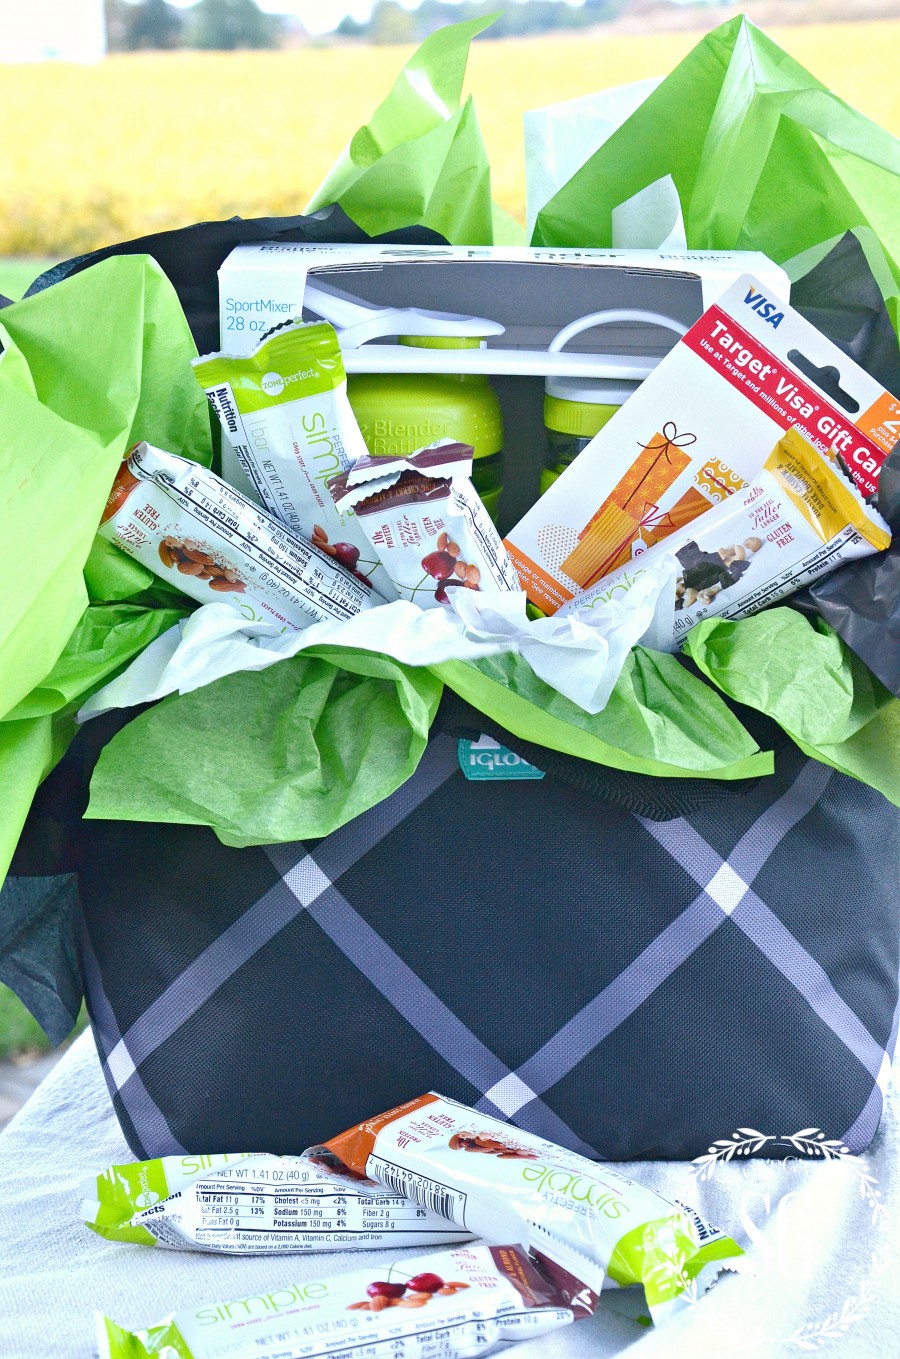 ON THE GO HEALTHY GIVEAWAY! $100.00 VALUE